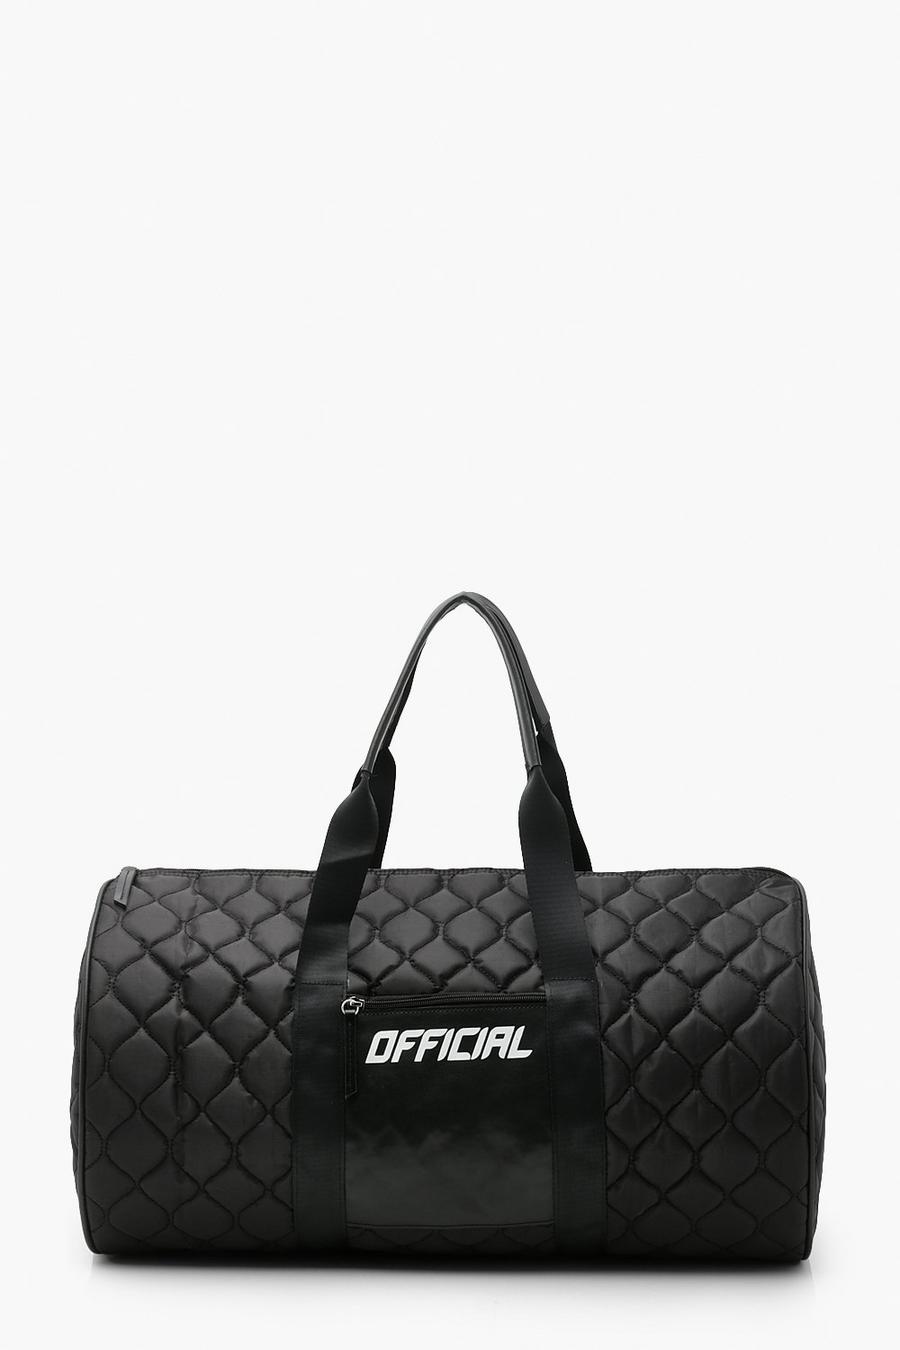 Black Official Quilted Sports Duffle Bag image number 1